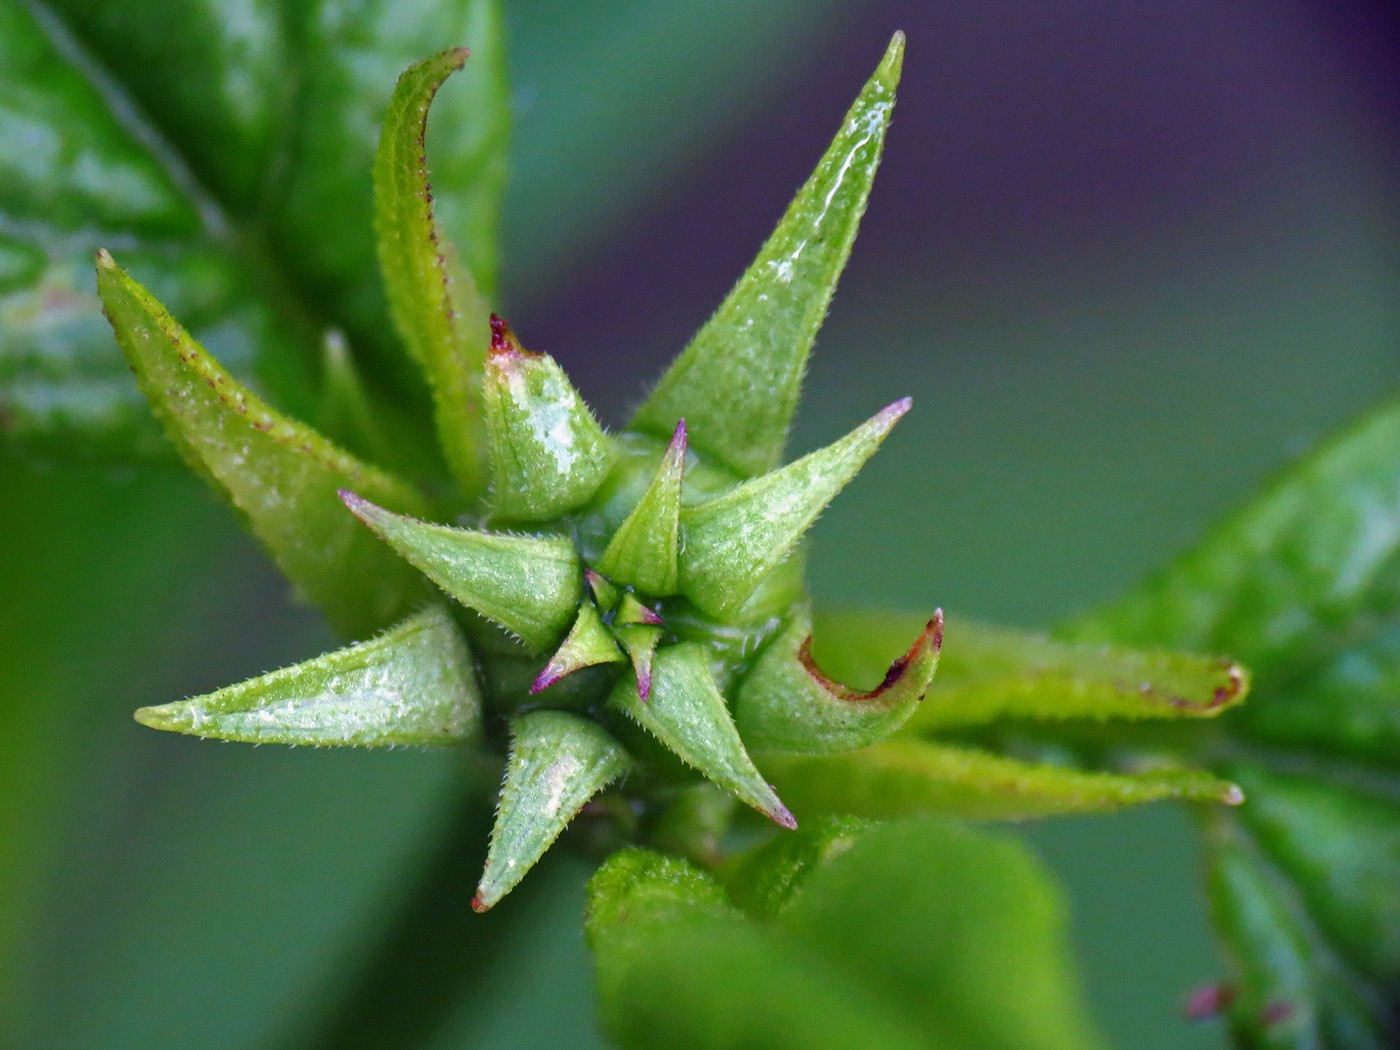 The Scientific Name is Helianthus microcephalus. You will likely hear them called Small Wood Sunflower, Small-headed Sunflower, Small Woodland Sunflower. This picture shows the Flower buds. of Helianthus microcephalus